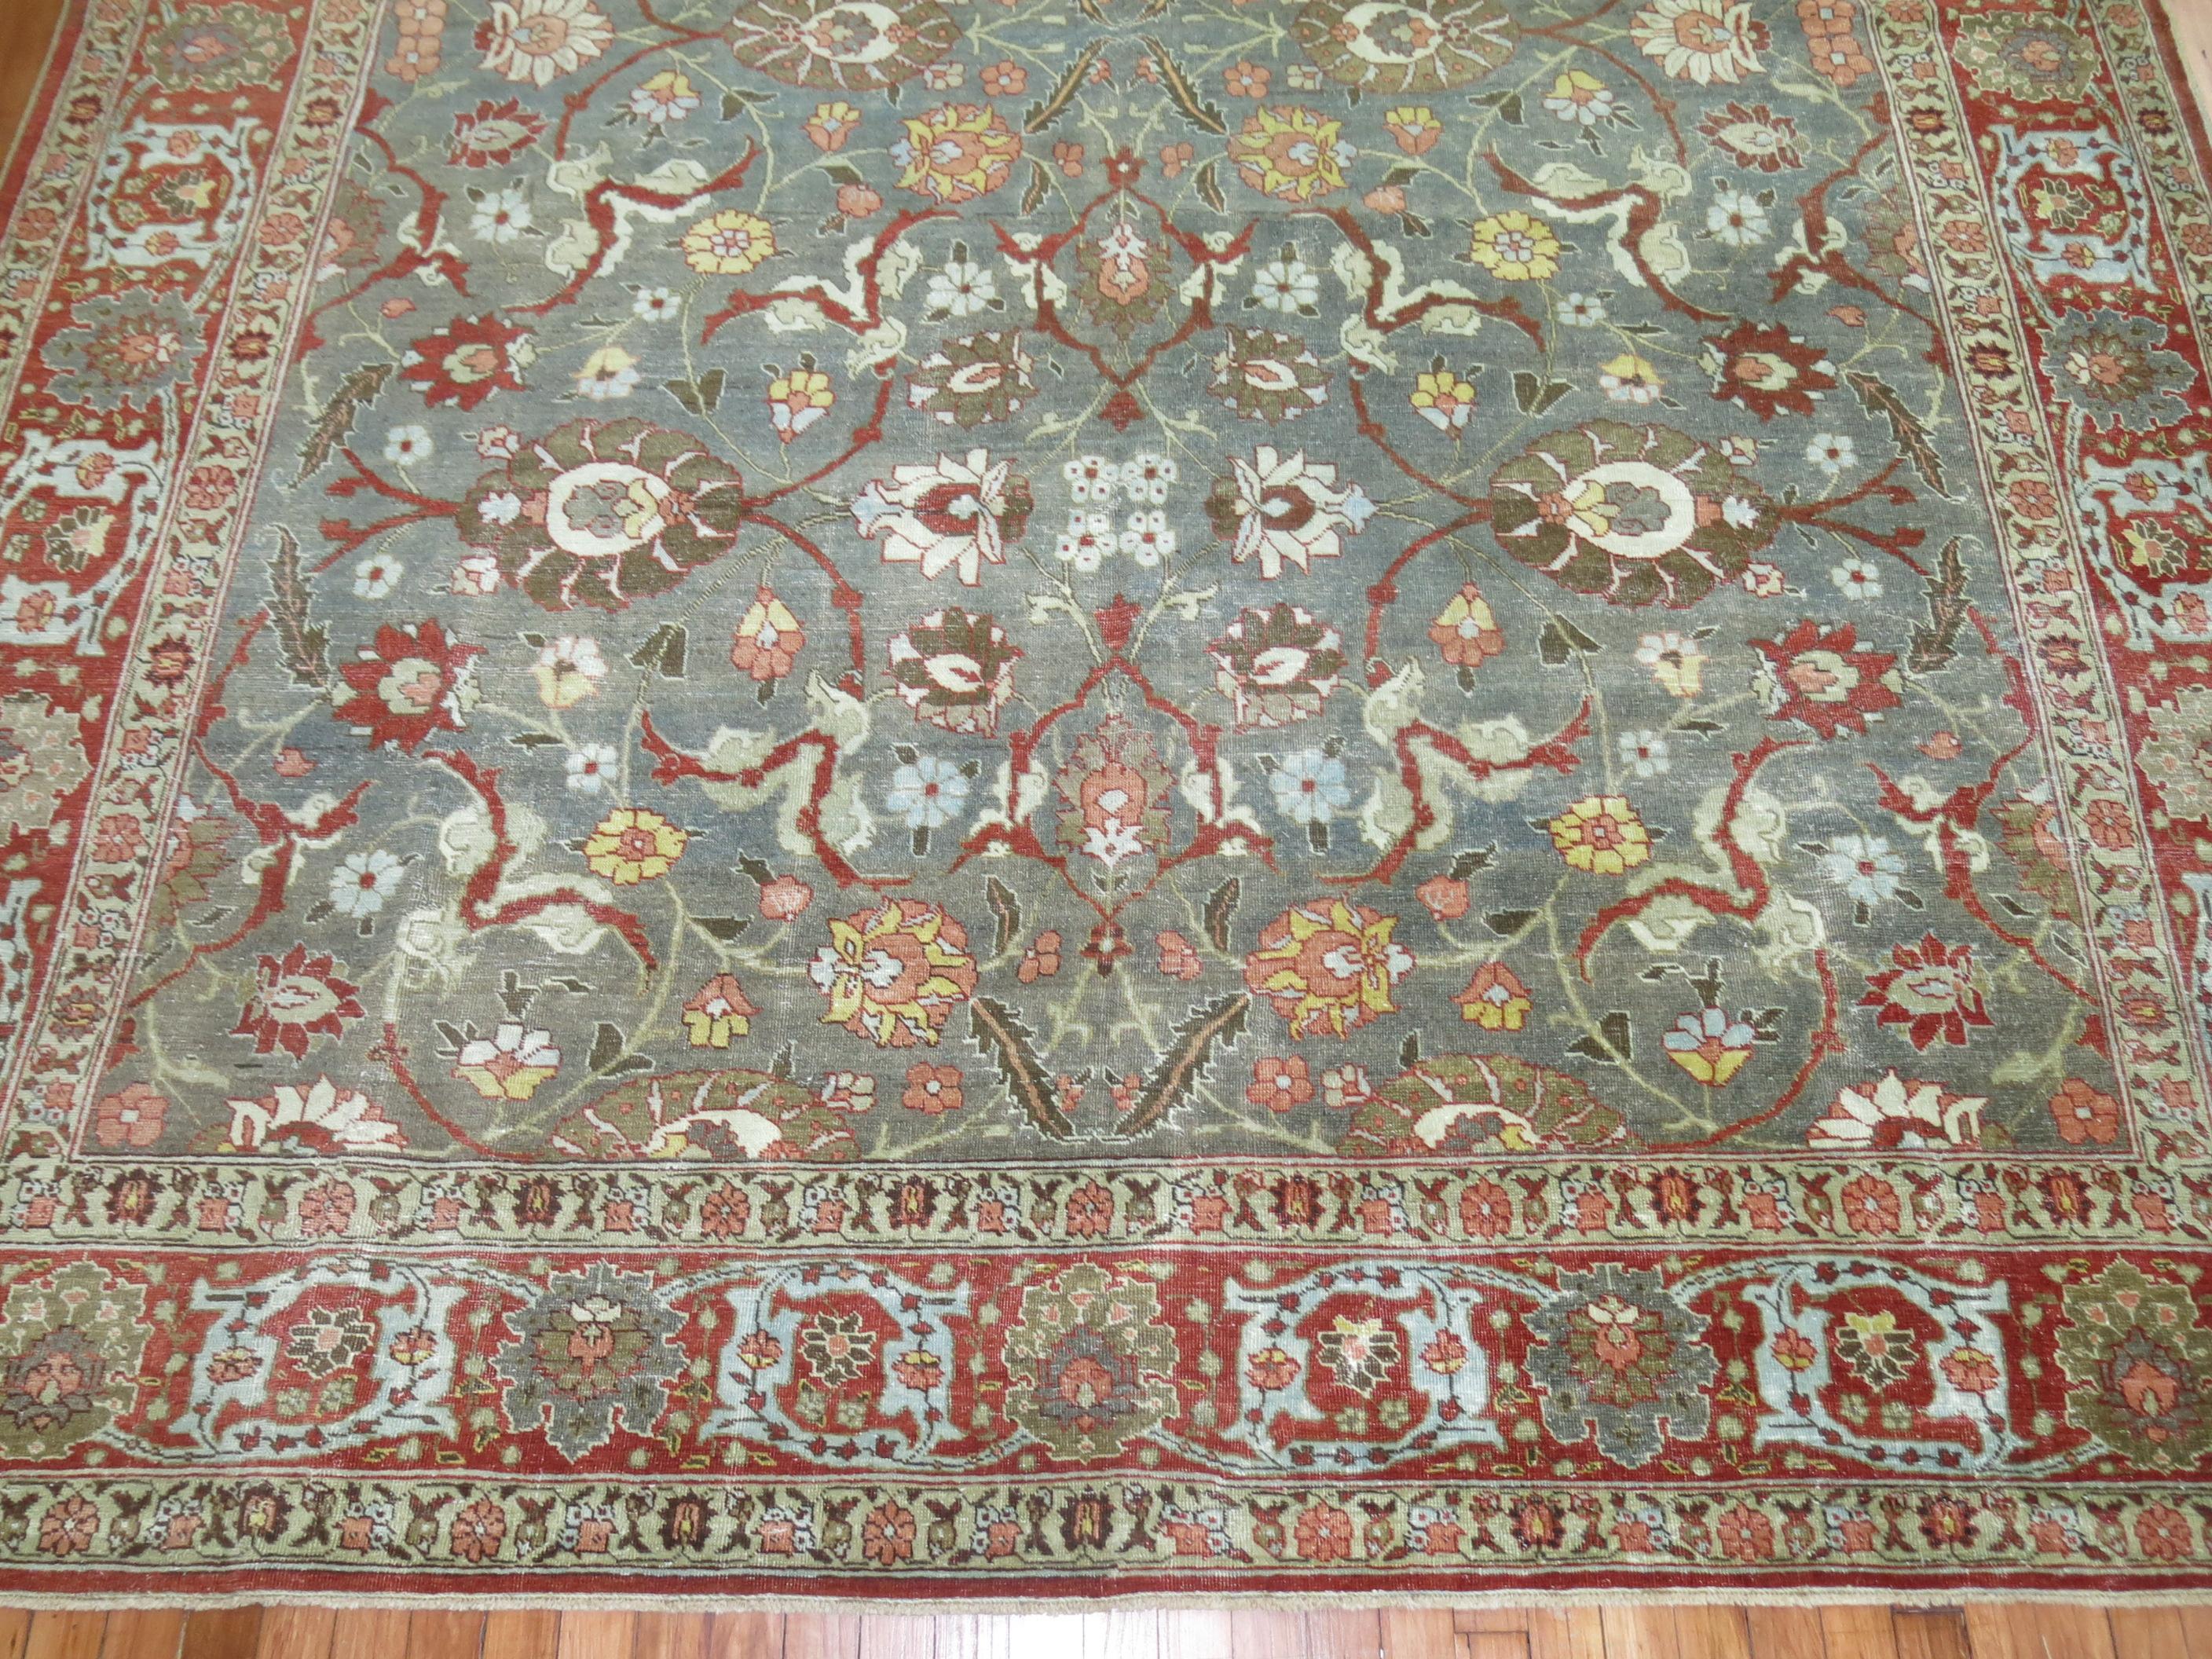 An early 20th century Persian Tabriz in dominant shades in green and brown

Measures: 8'3'' x 11'5''.